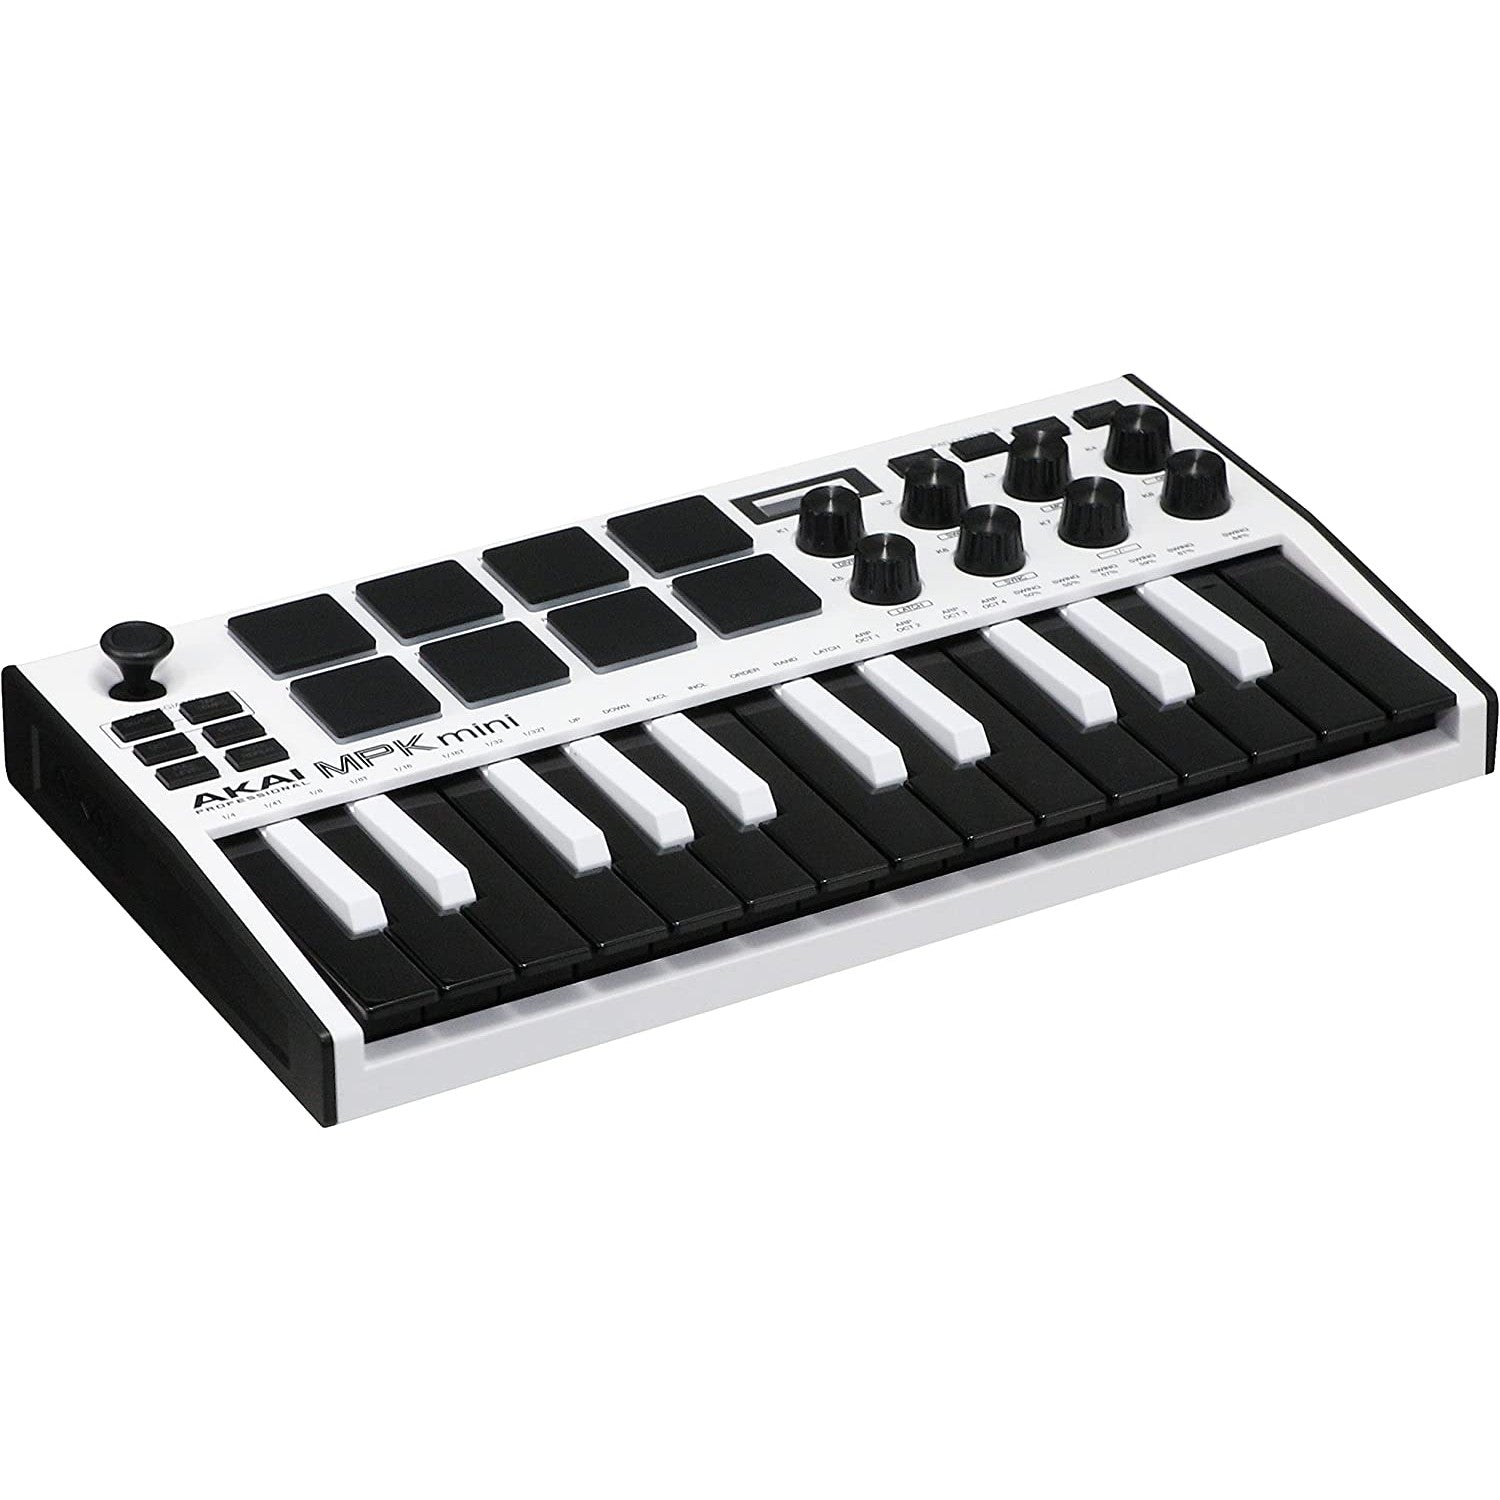 Introducing the MPK Mini MK3 – Your hit song starts here! –